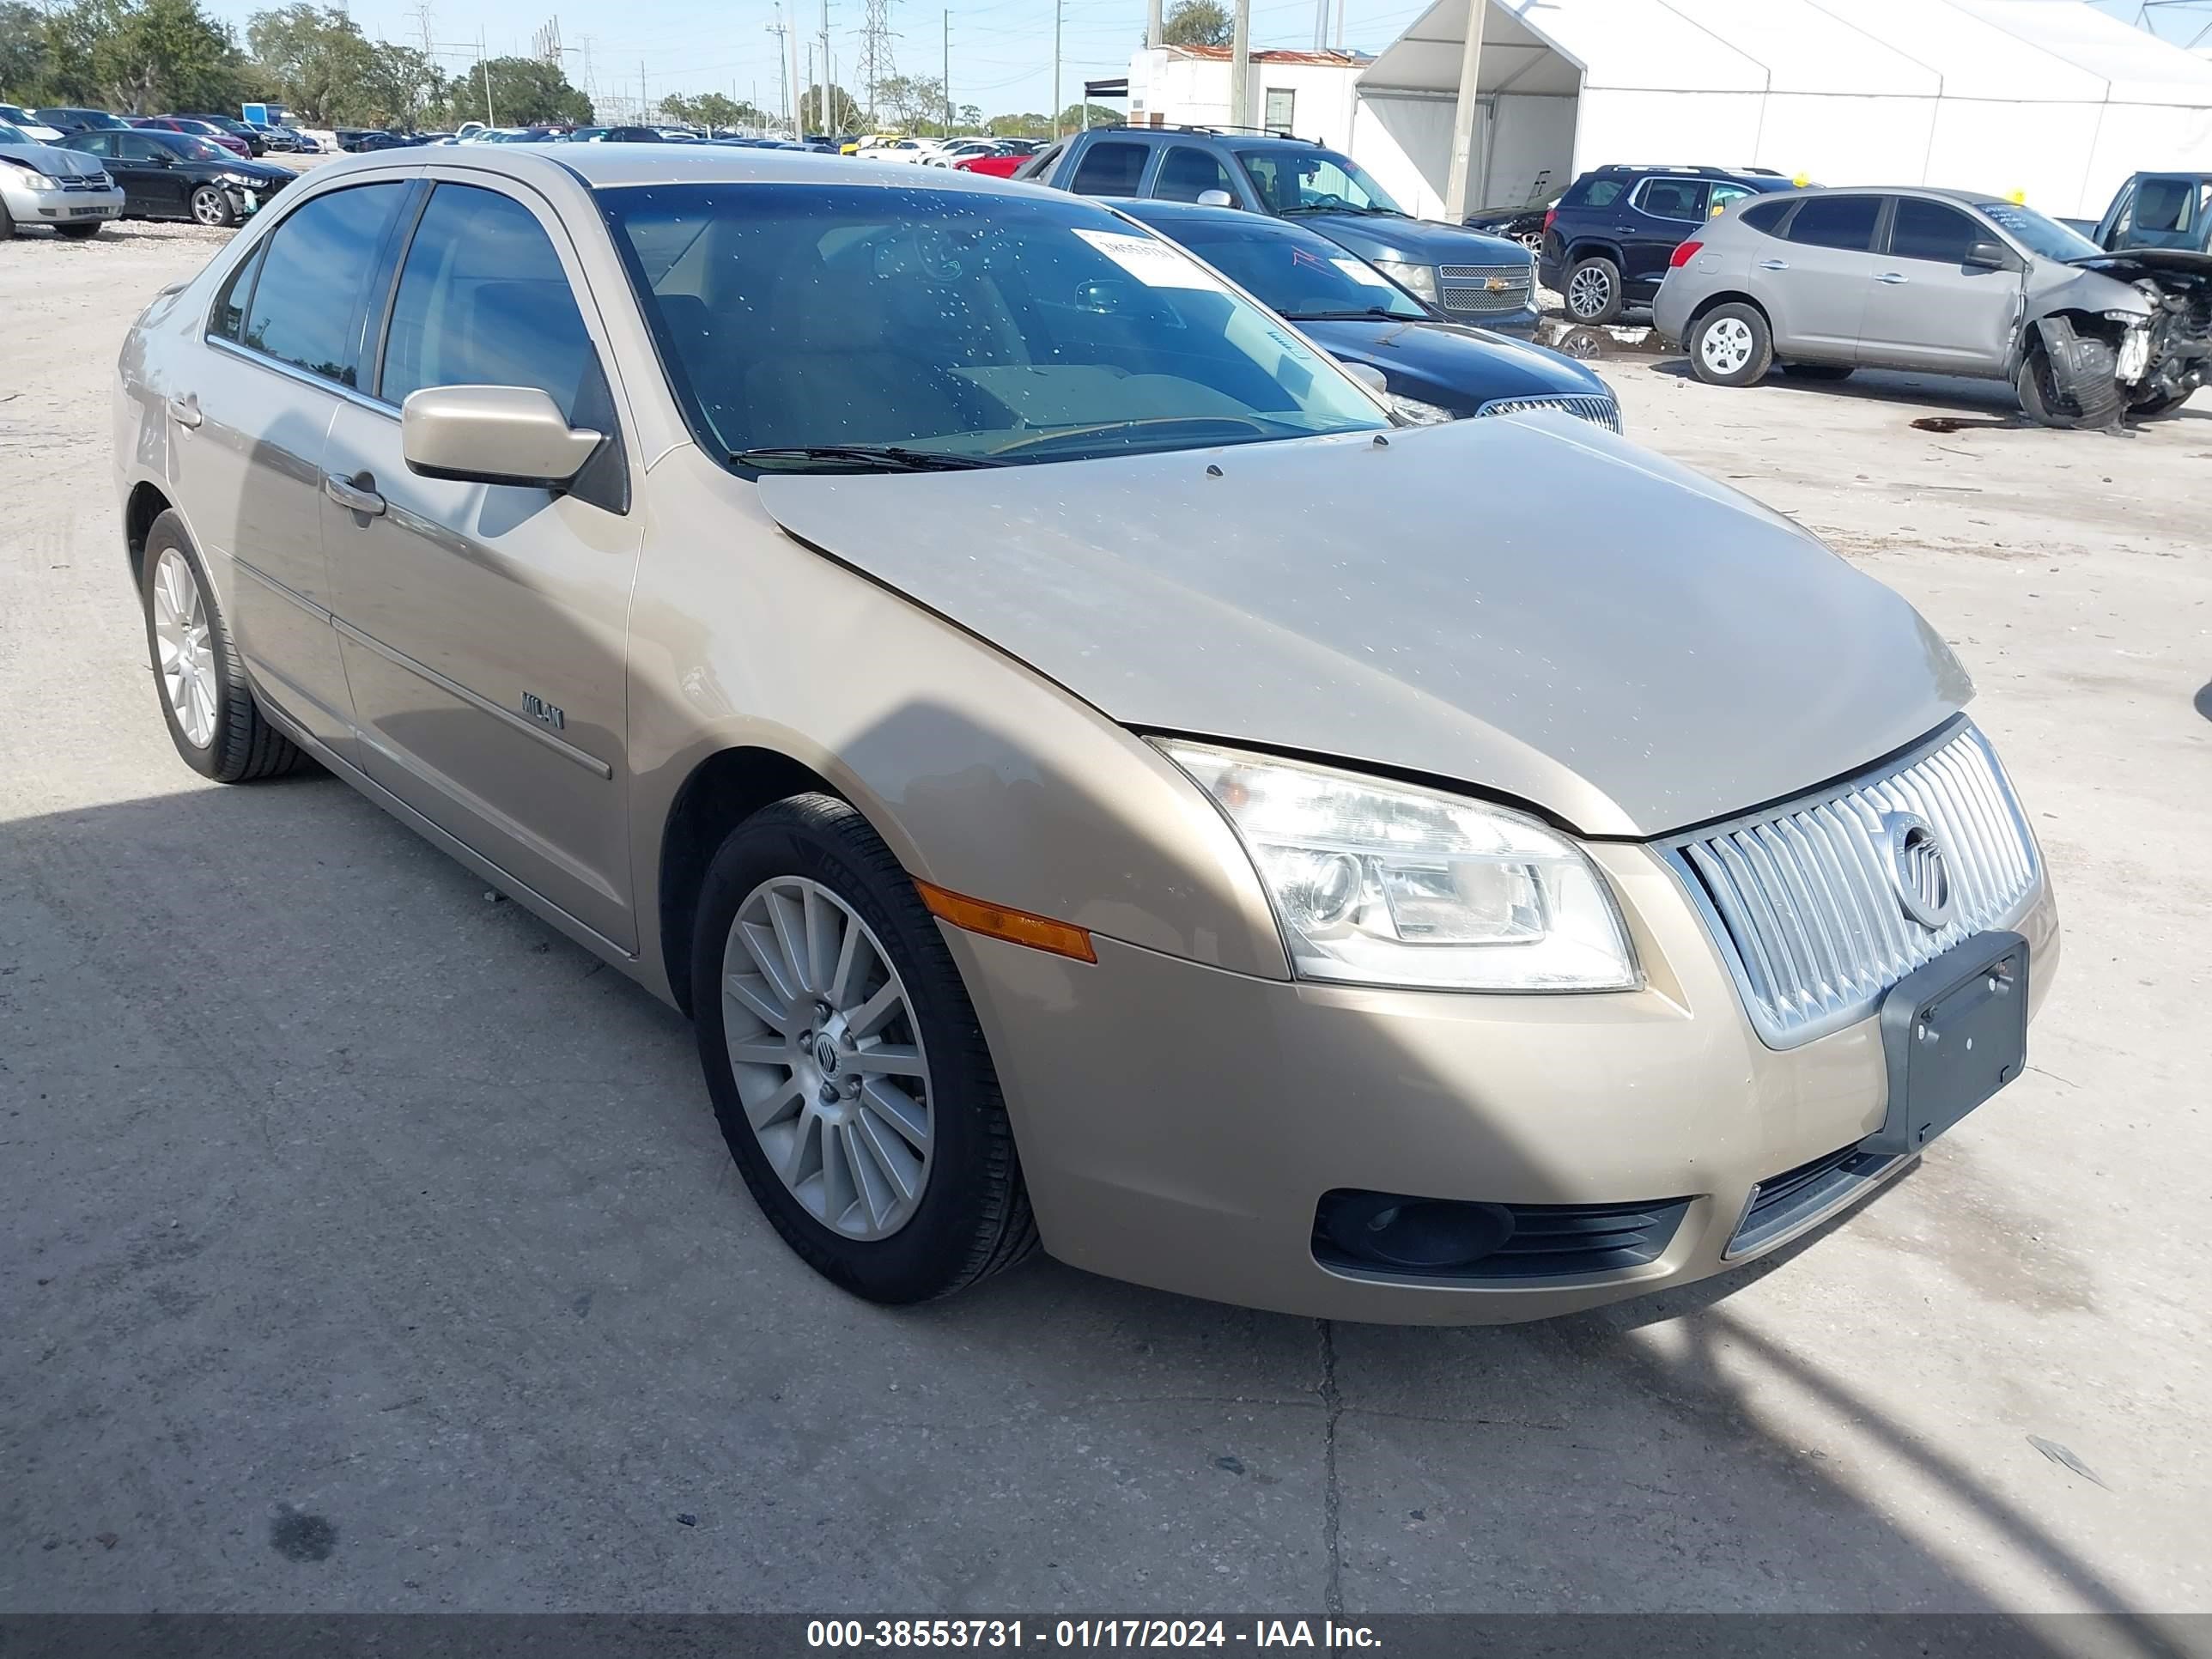 vin: 3MEHM08158R612841 3MEHM08158R612841 2008 mercury milan 3000 for Sale in 33760, 5152 126Th Ave N, Clearwater, USA